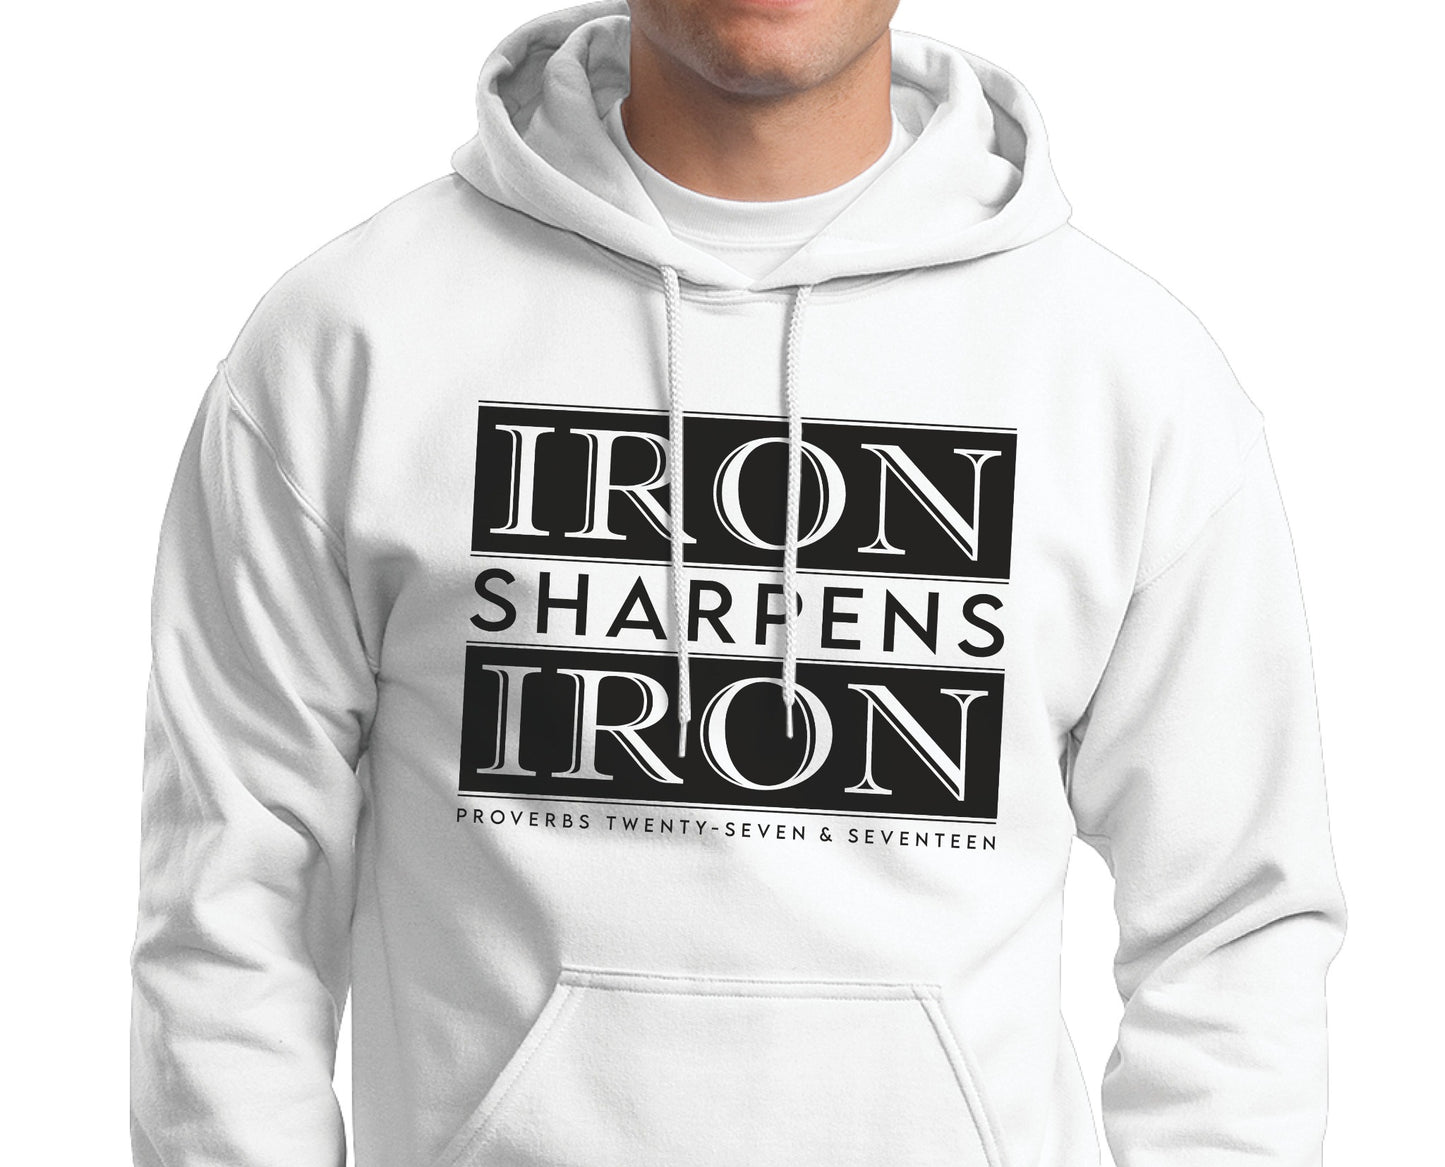 Man wearing an Iron Sharpens Iron Proverbs 27:17 Bible Verse Christian aesthetic faith-based hoodie with bold black design printed on cozy white unisex hoodie sweatshirt for men and women